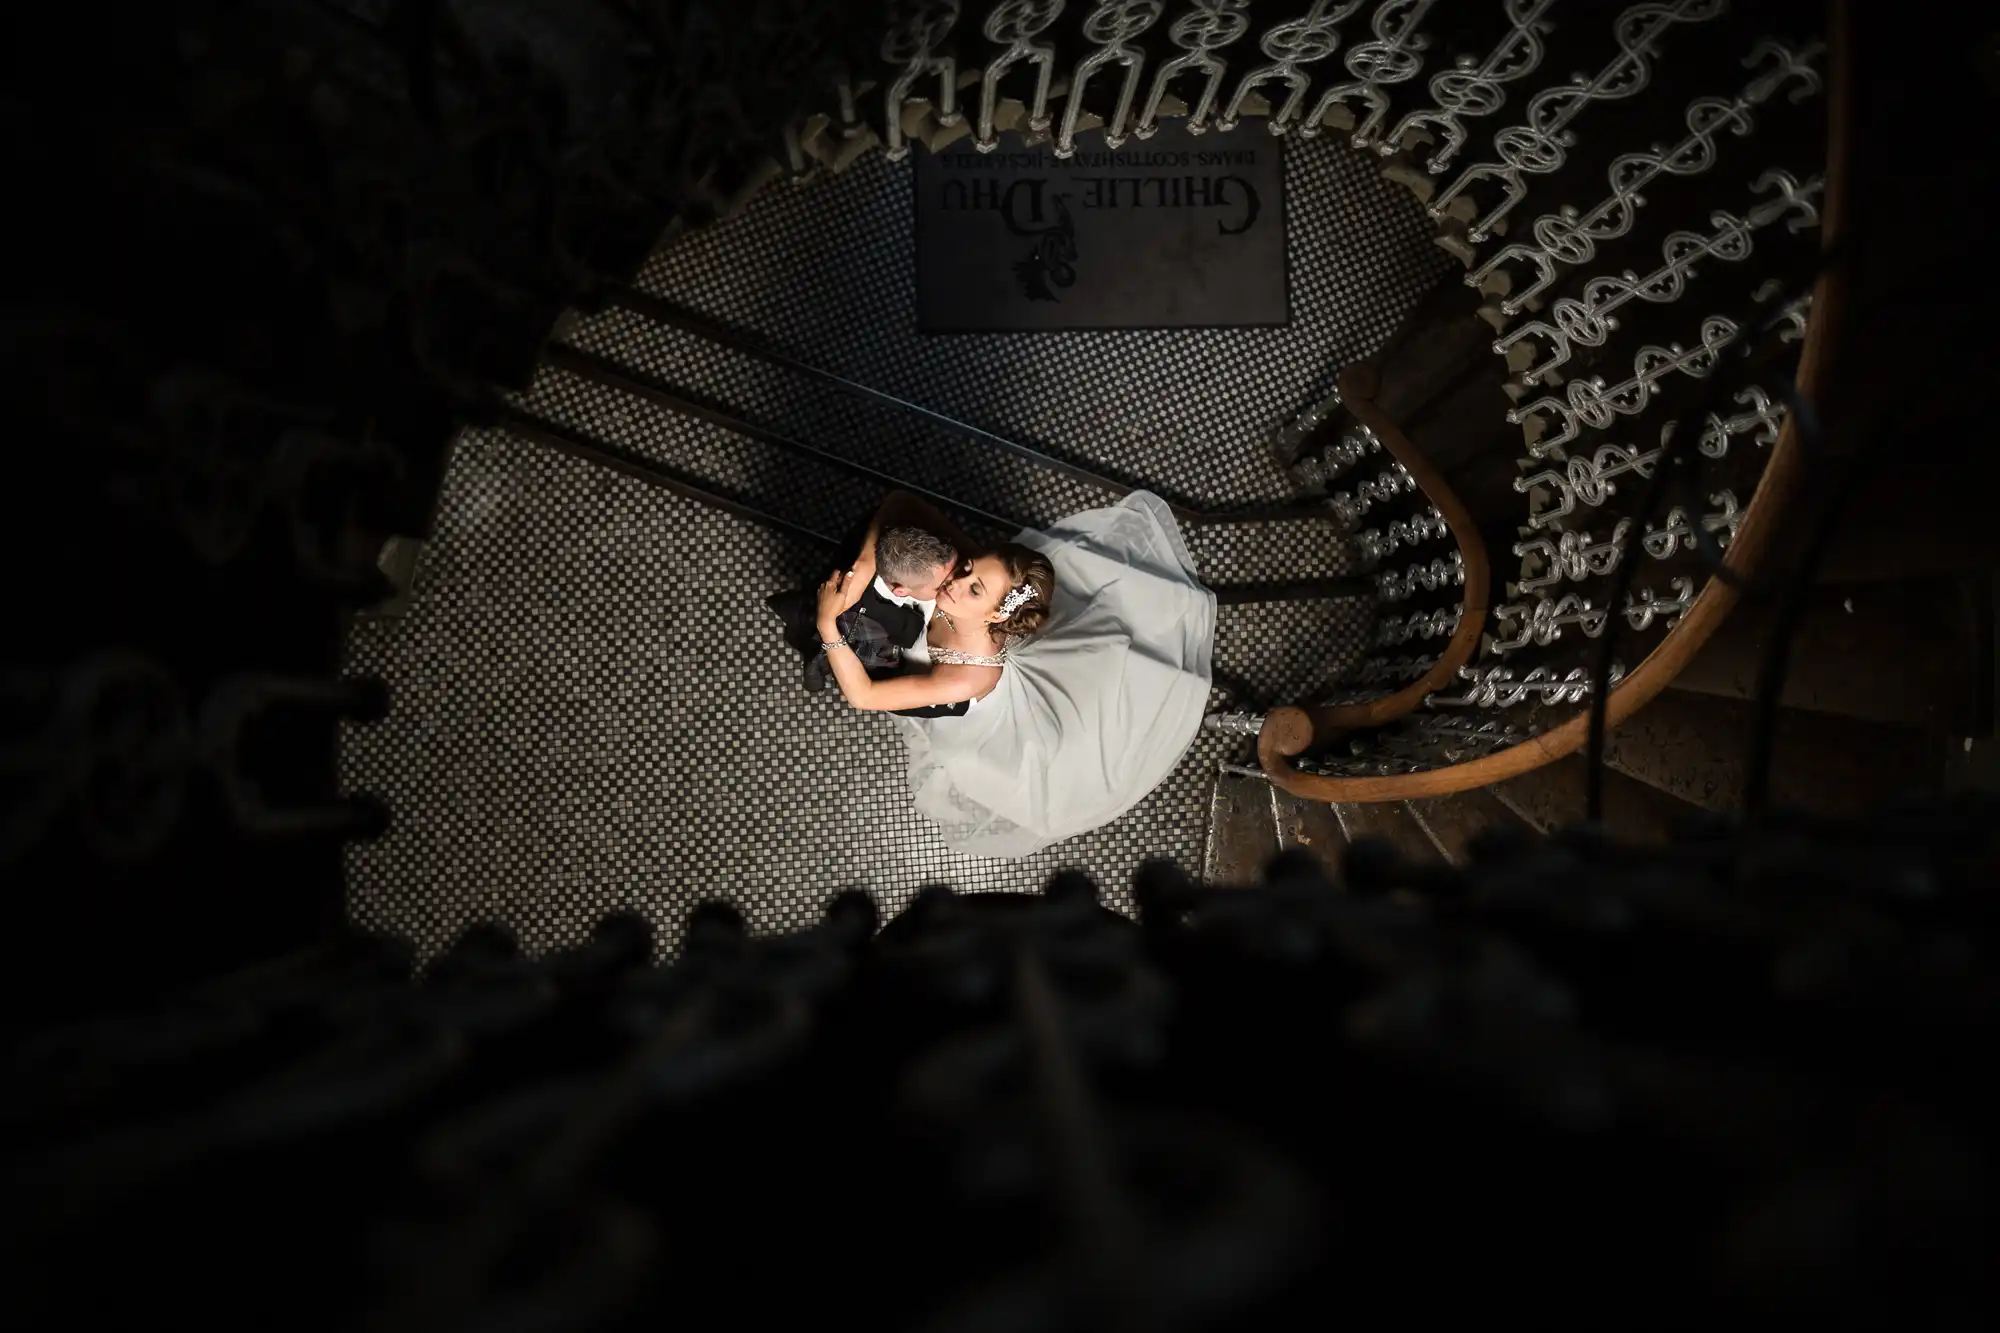 Wedding couple embracing on a spiral staircase from an overhead perspective, with intricate railing patterns surrounding them.